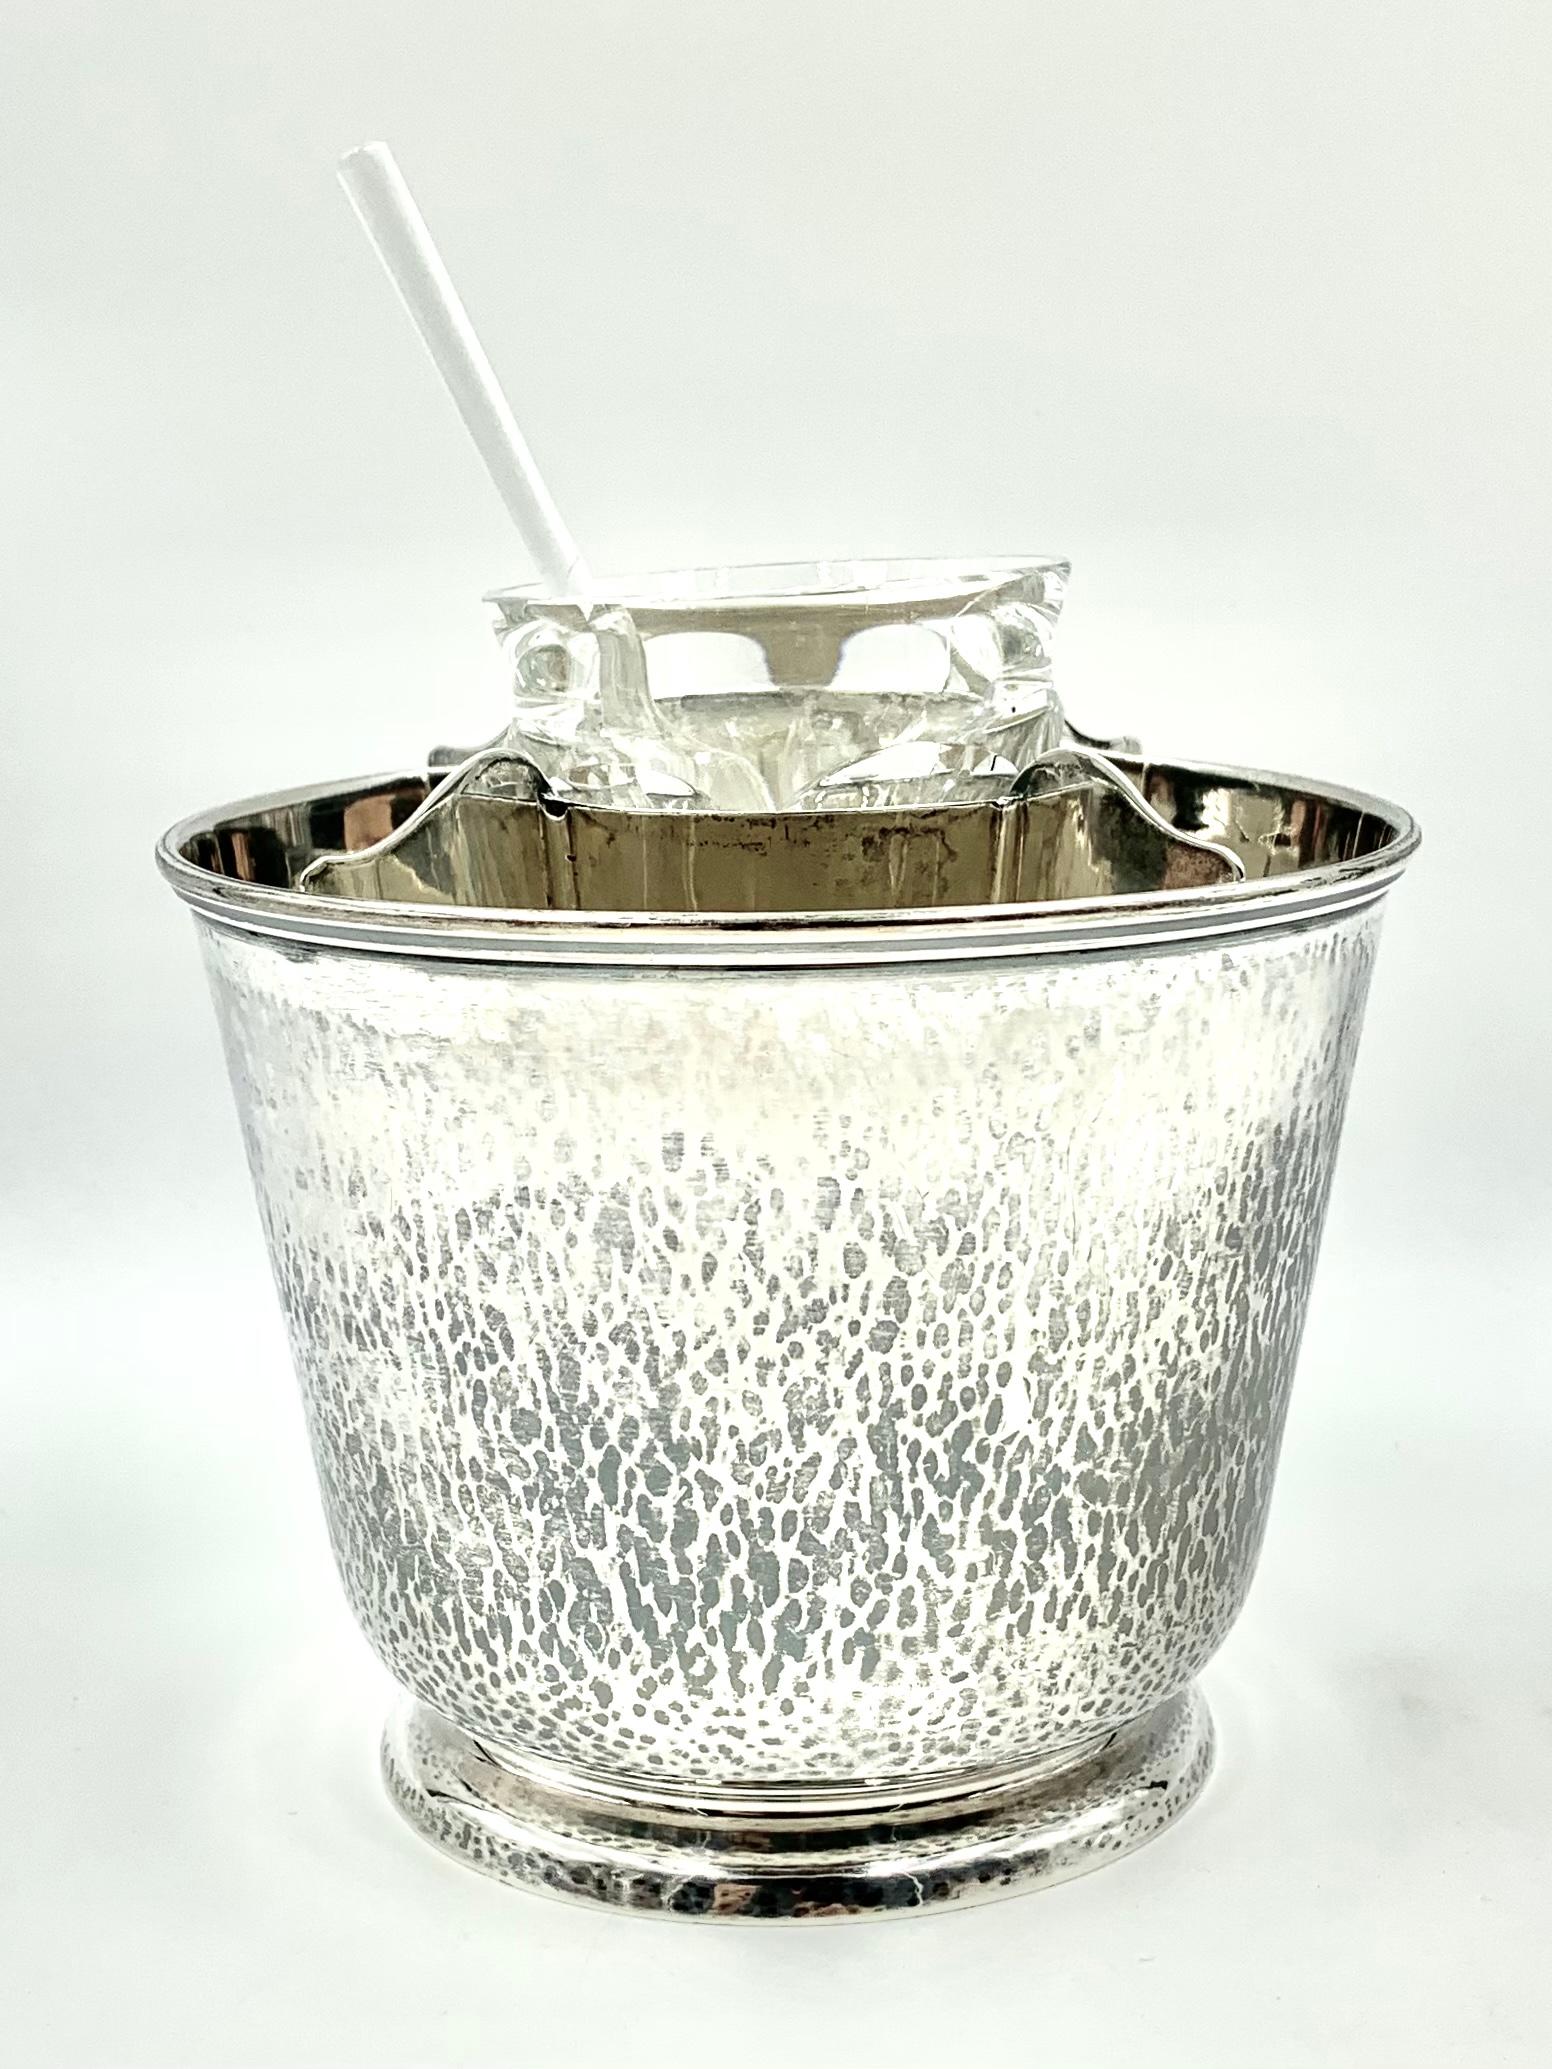 Rare California Modern American Arts & Crafts sterling silver Martele work hand hammered caviar bowl by Clemens Friedell, 1872-1963, Pasadena, California.
A very fine example of Modernist American Arts & Crafts Movement by the famed California